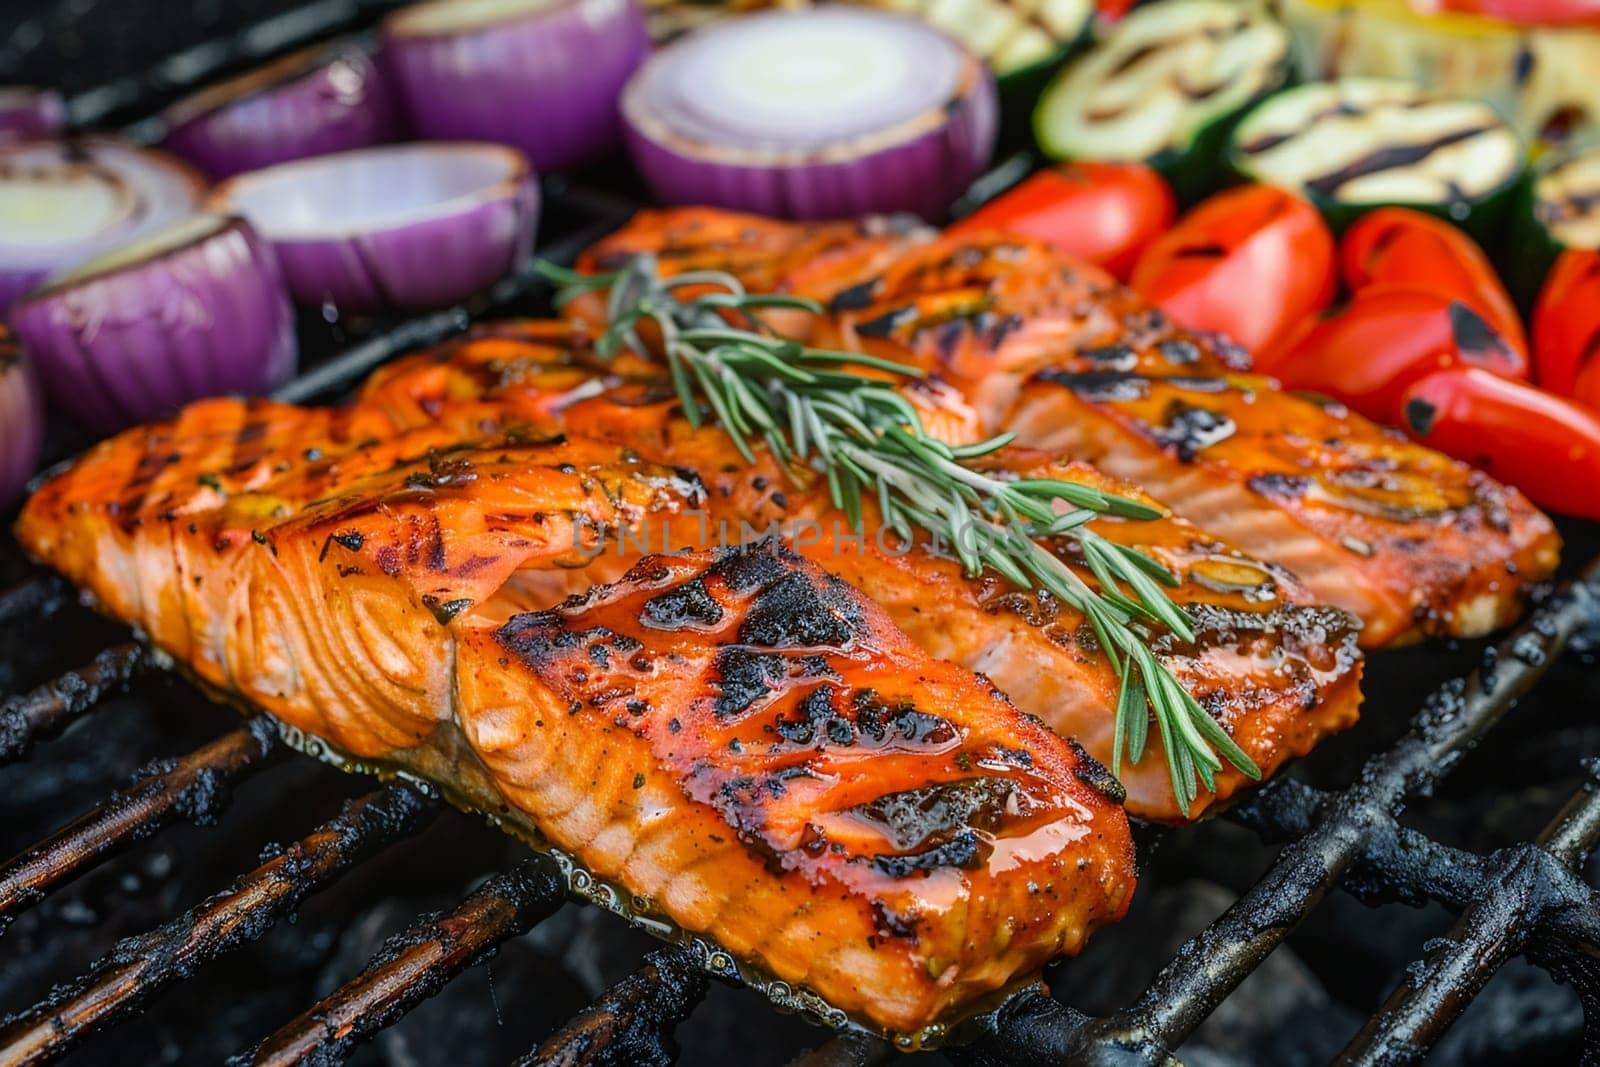 Juicy salmon fillets with grill marks alongside fresh vegetables over open BBQ flames. Culinary delight for garden party and healthy eating.